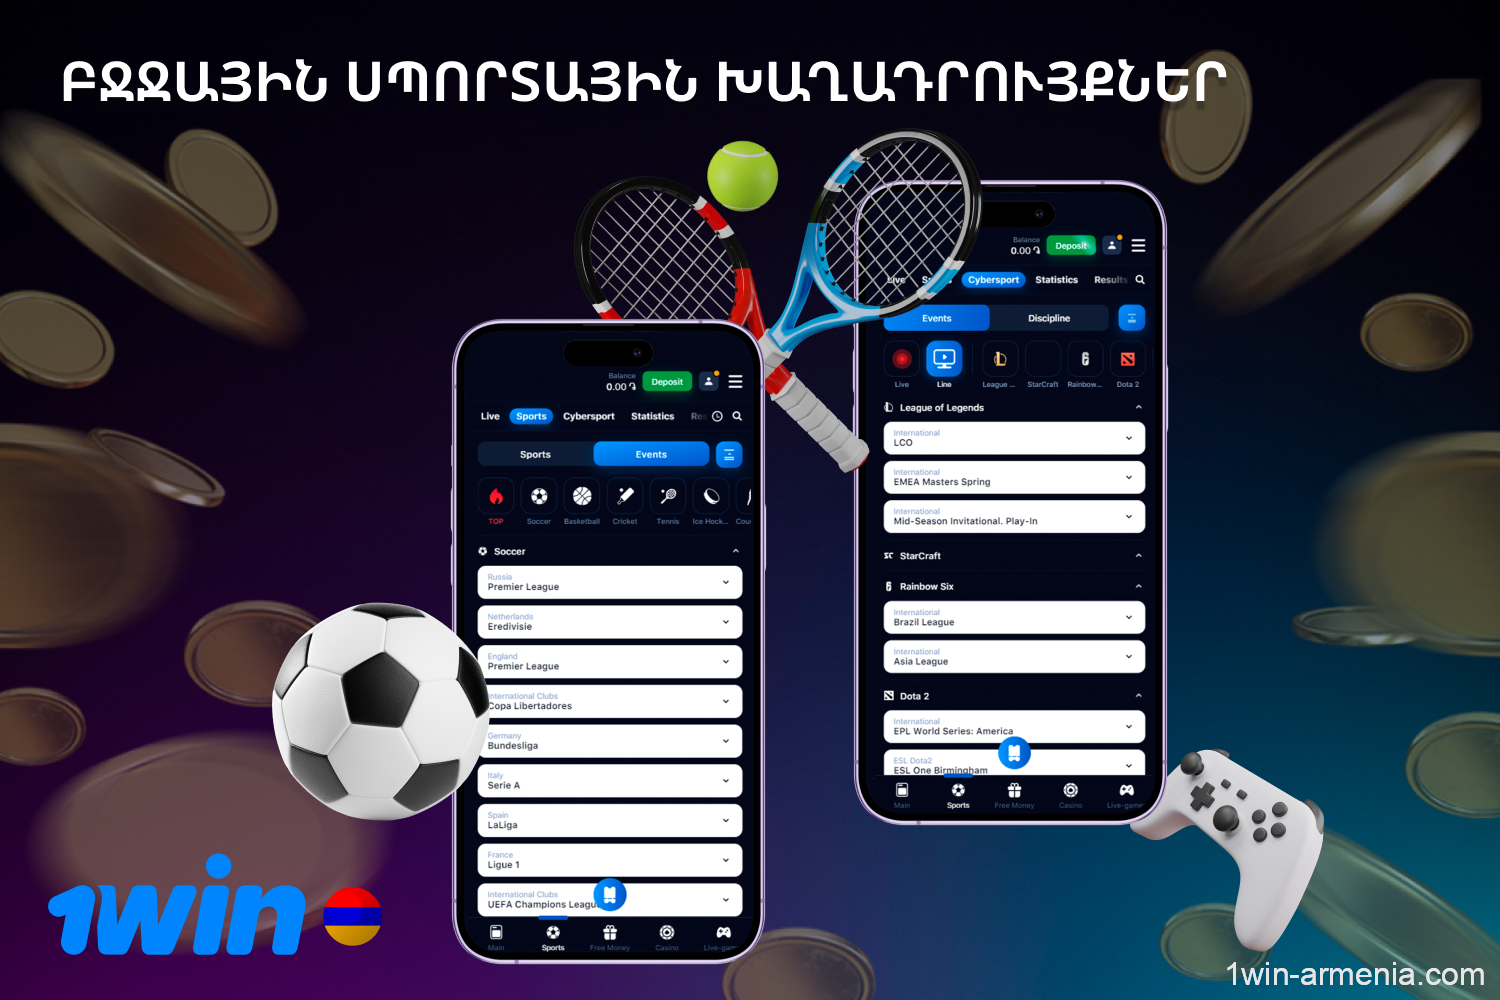 With the 1win app, users can engage in a wide range of sports betting and enjoy various bonuses